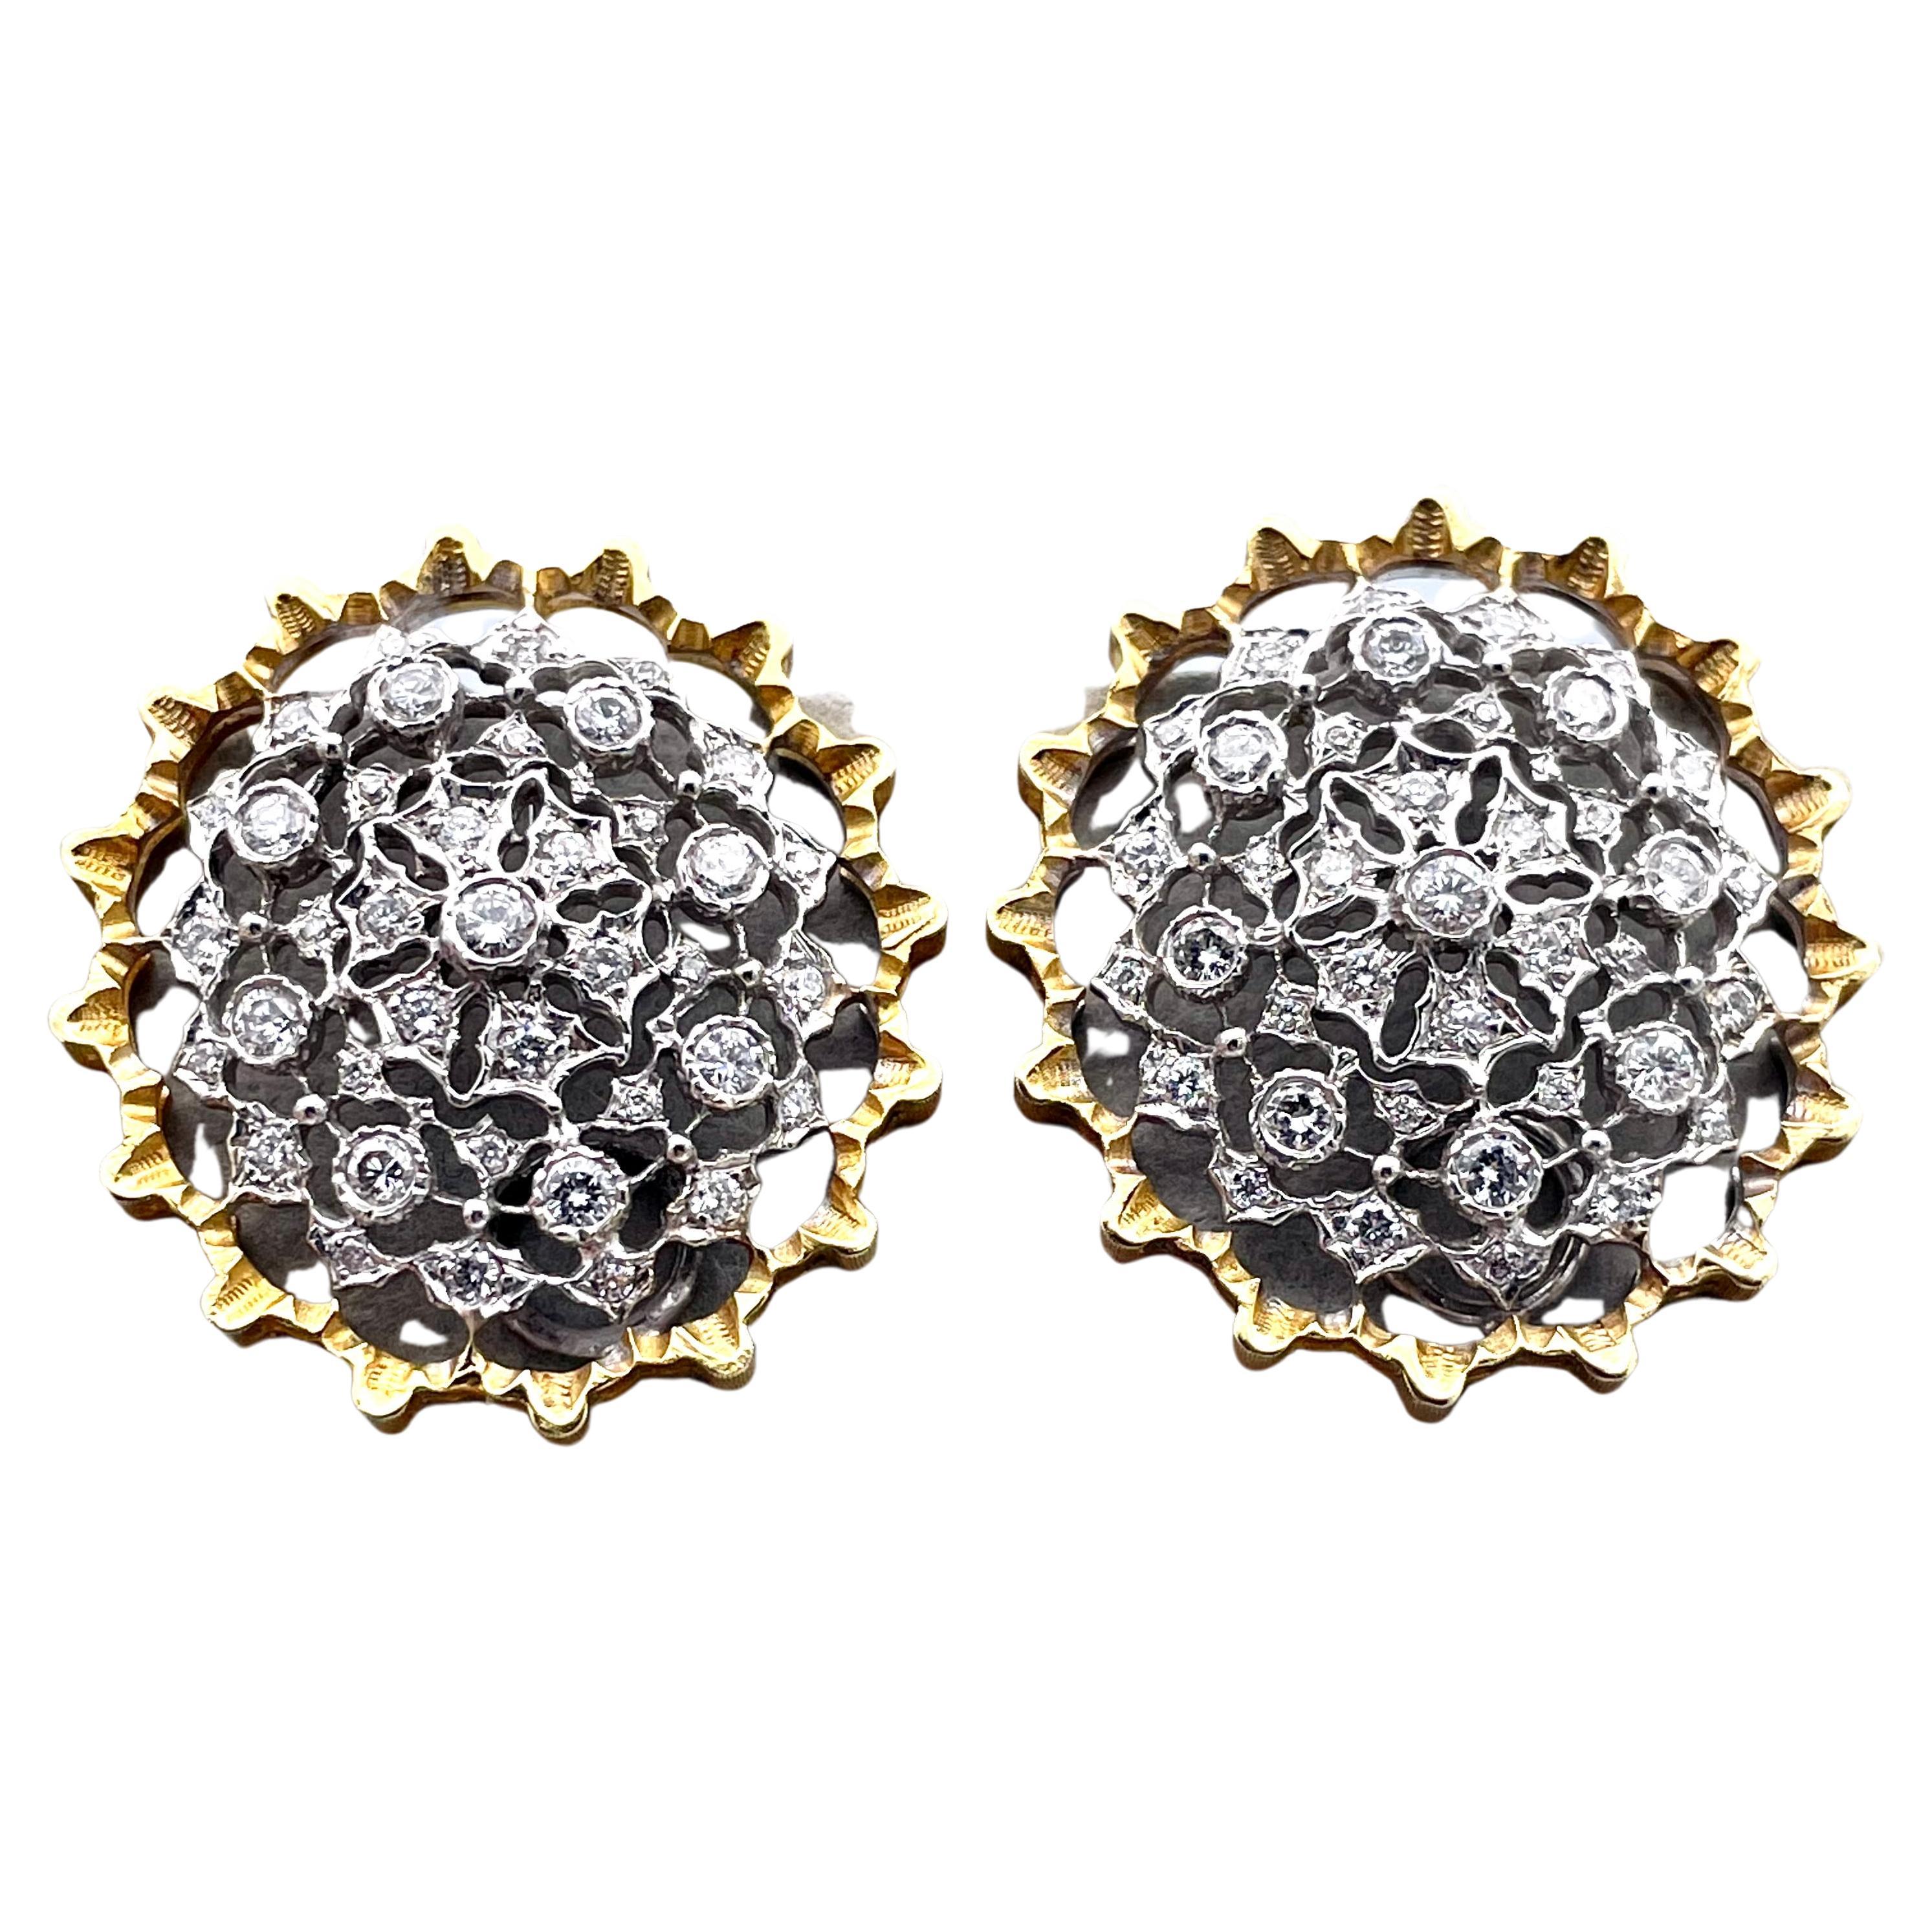 Big and bright ear clips. Made and signed by MARIO BUCCELLATI.  18K yellow gold scalloped borders, with intricate diamond-encrusted cut-out center.  Approximately 1.20 carats of shimmering faceted stones. 1